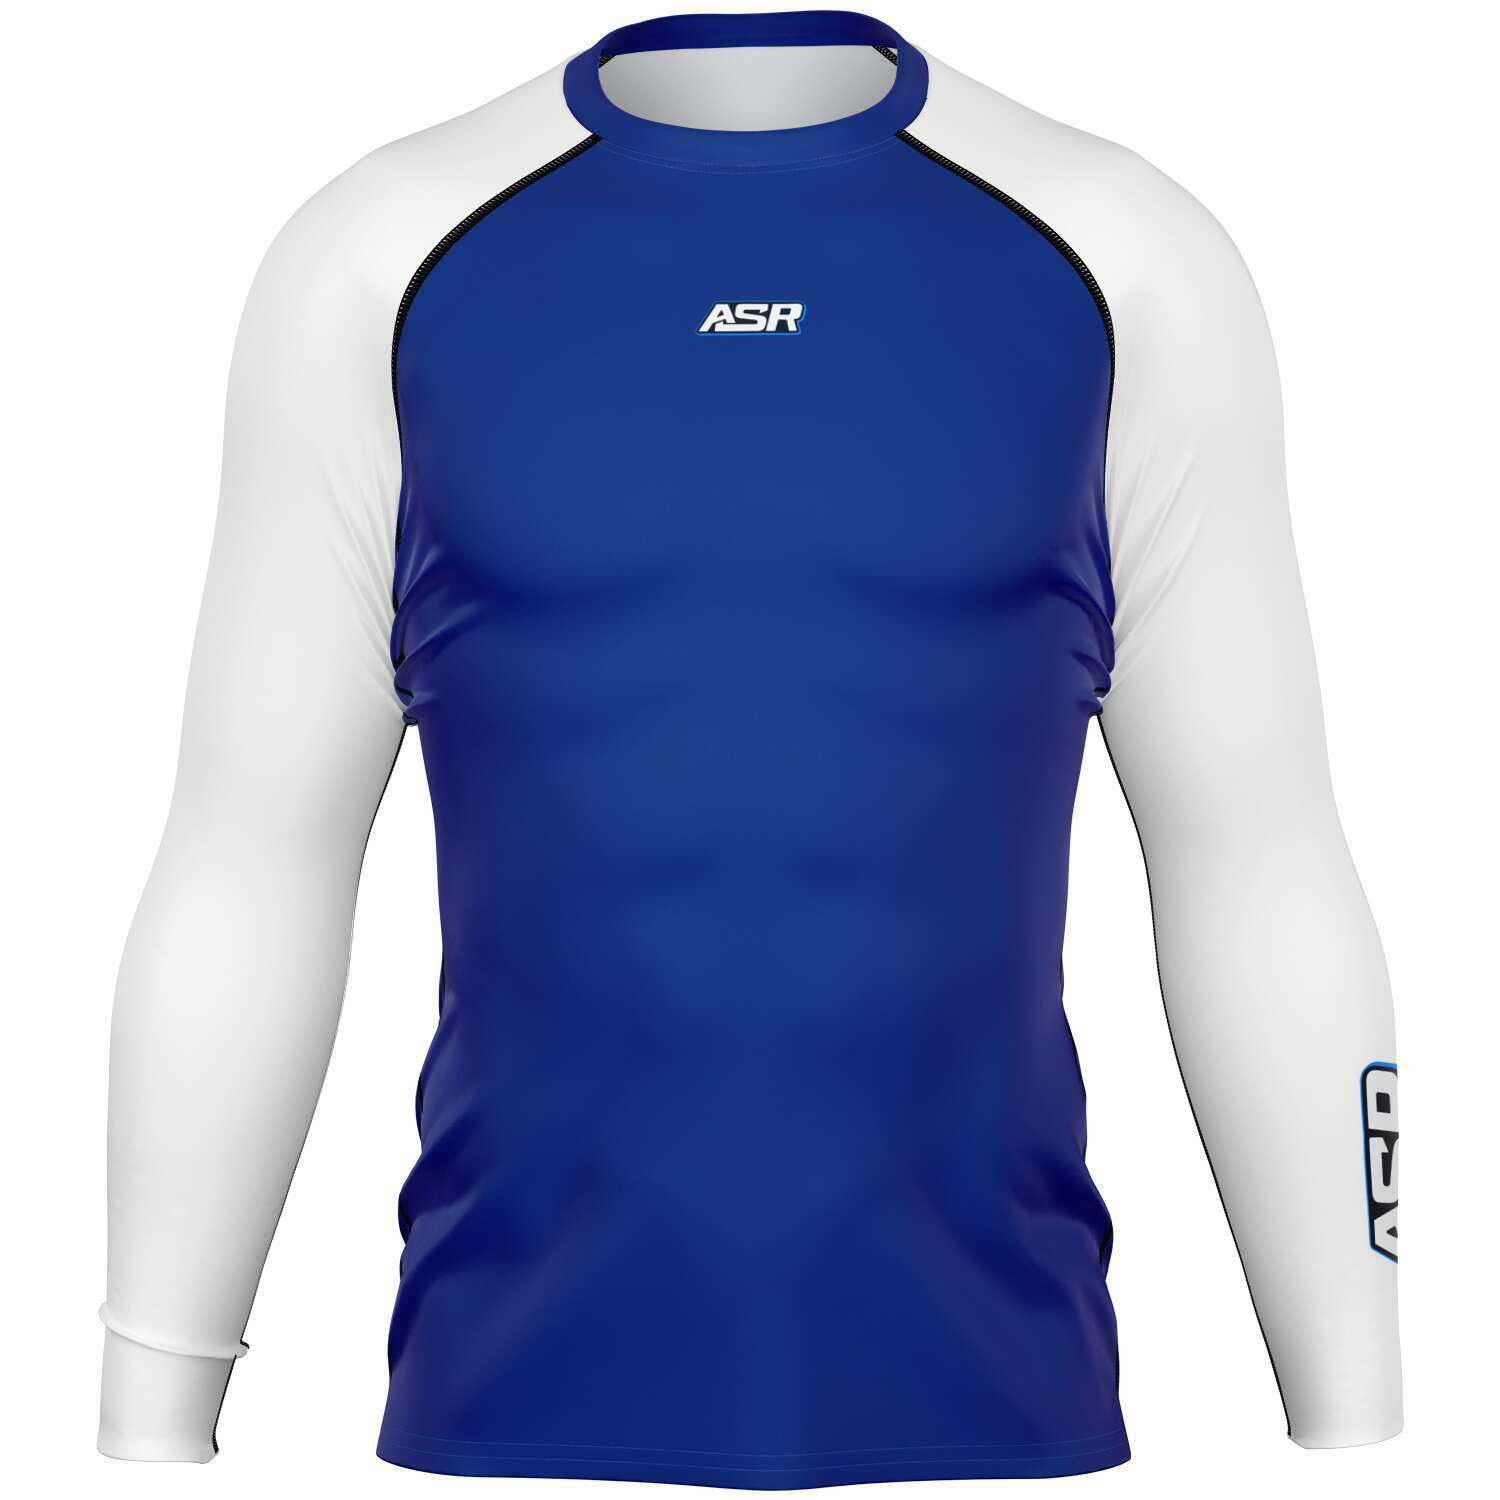 ASR Blue / White Sleeves Performance Compression Top